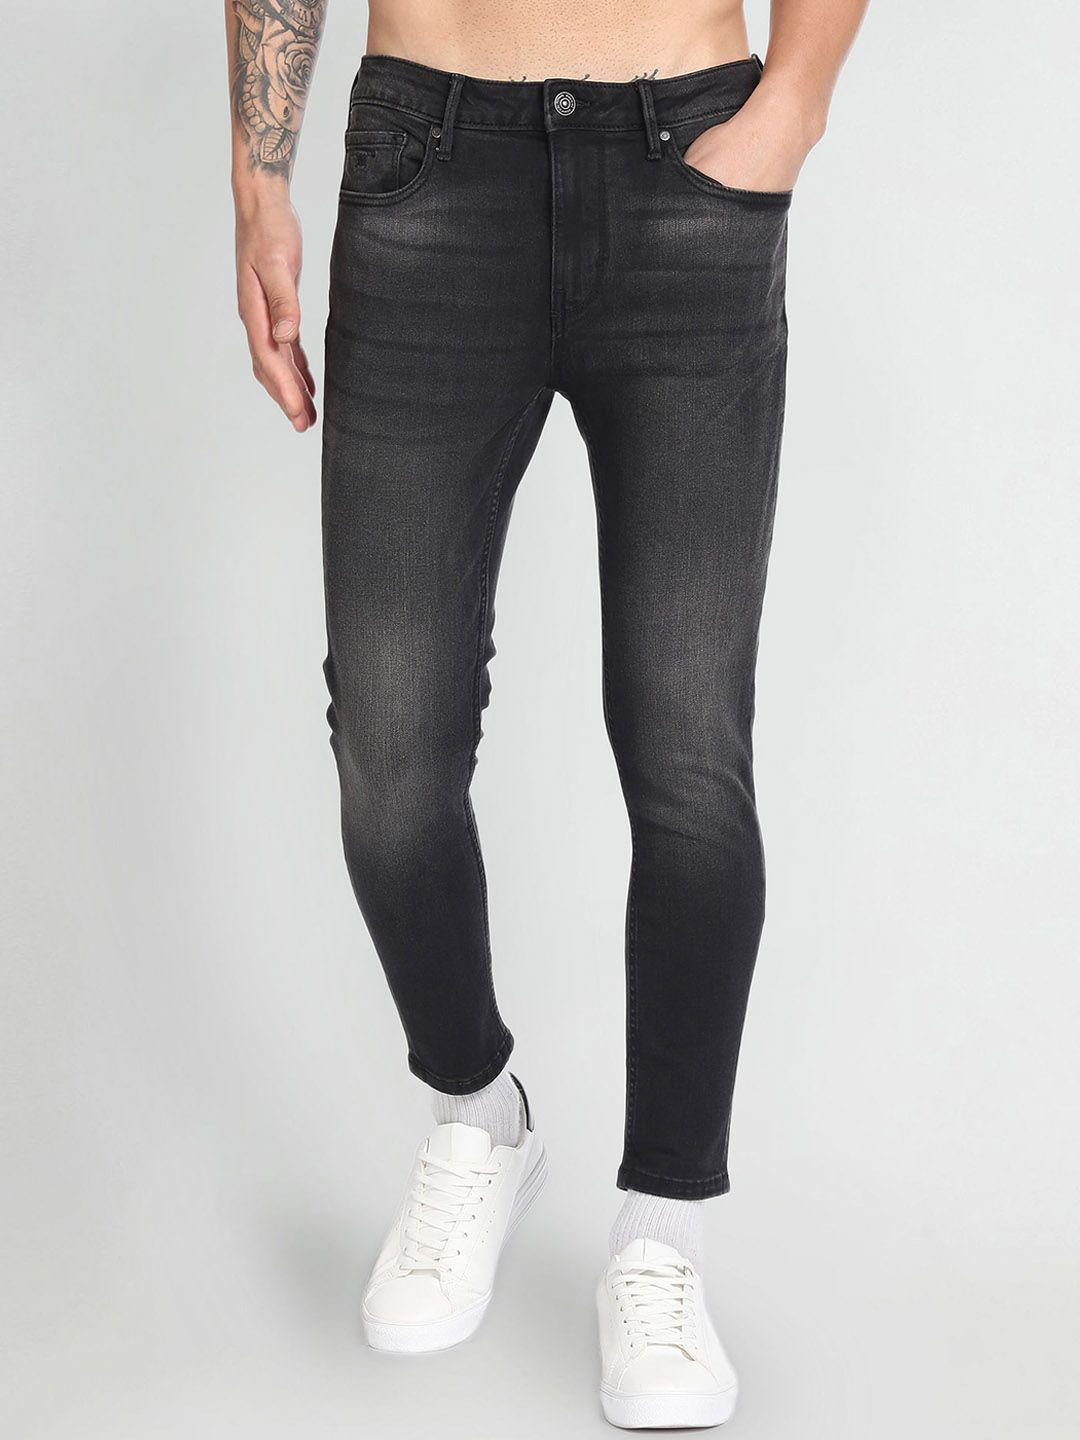 flying-machine-men-skinny-fit-light-fade-clean-look-stretchable-jeans